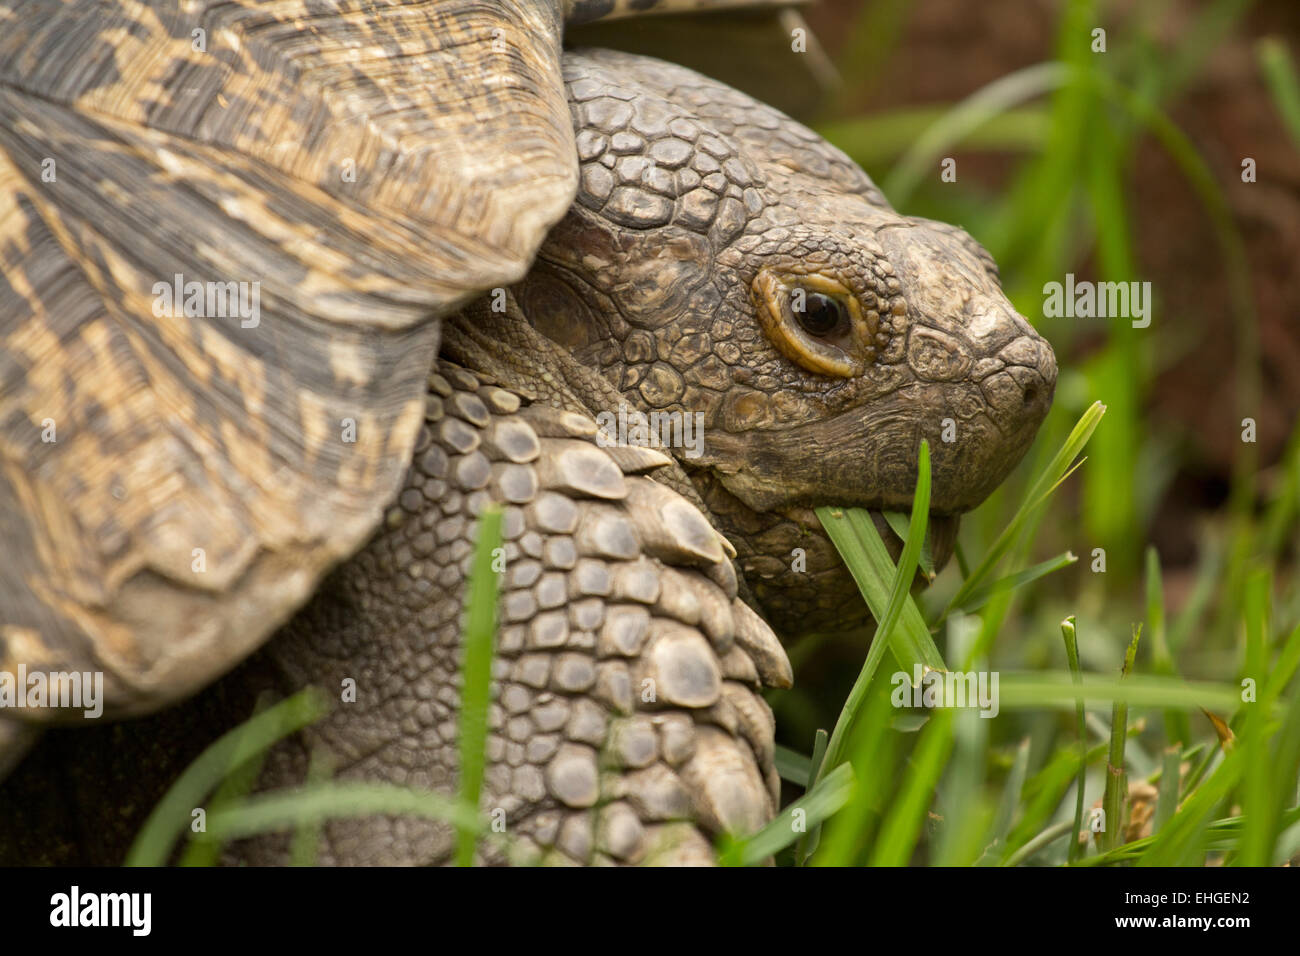 A turtle eating grass Stock Photo